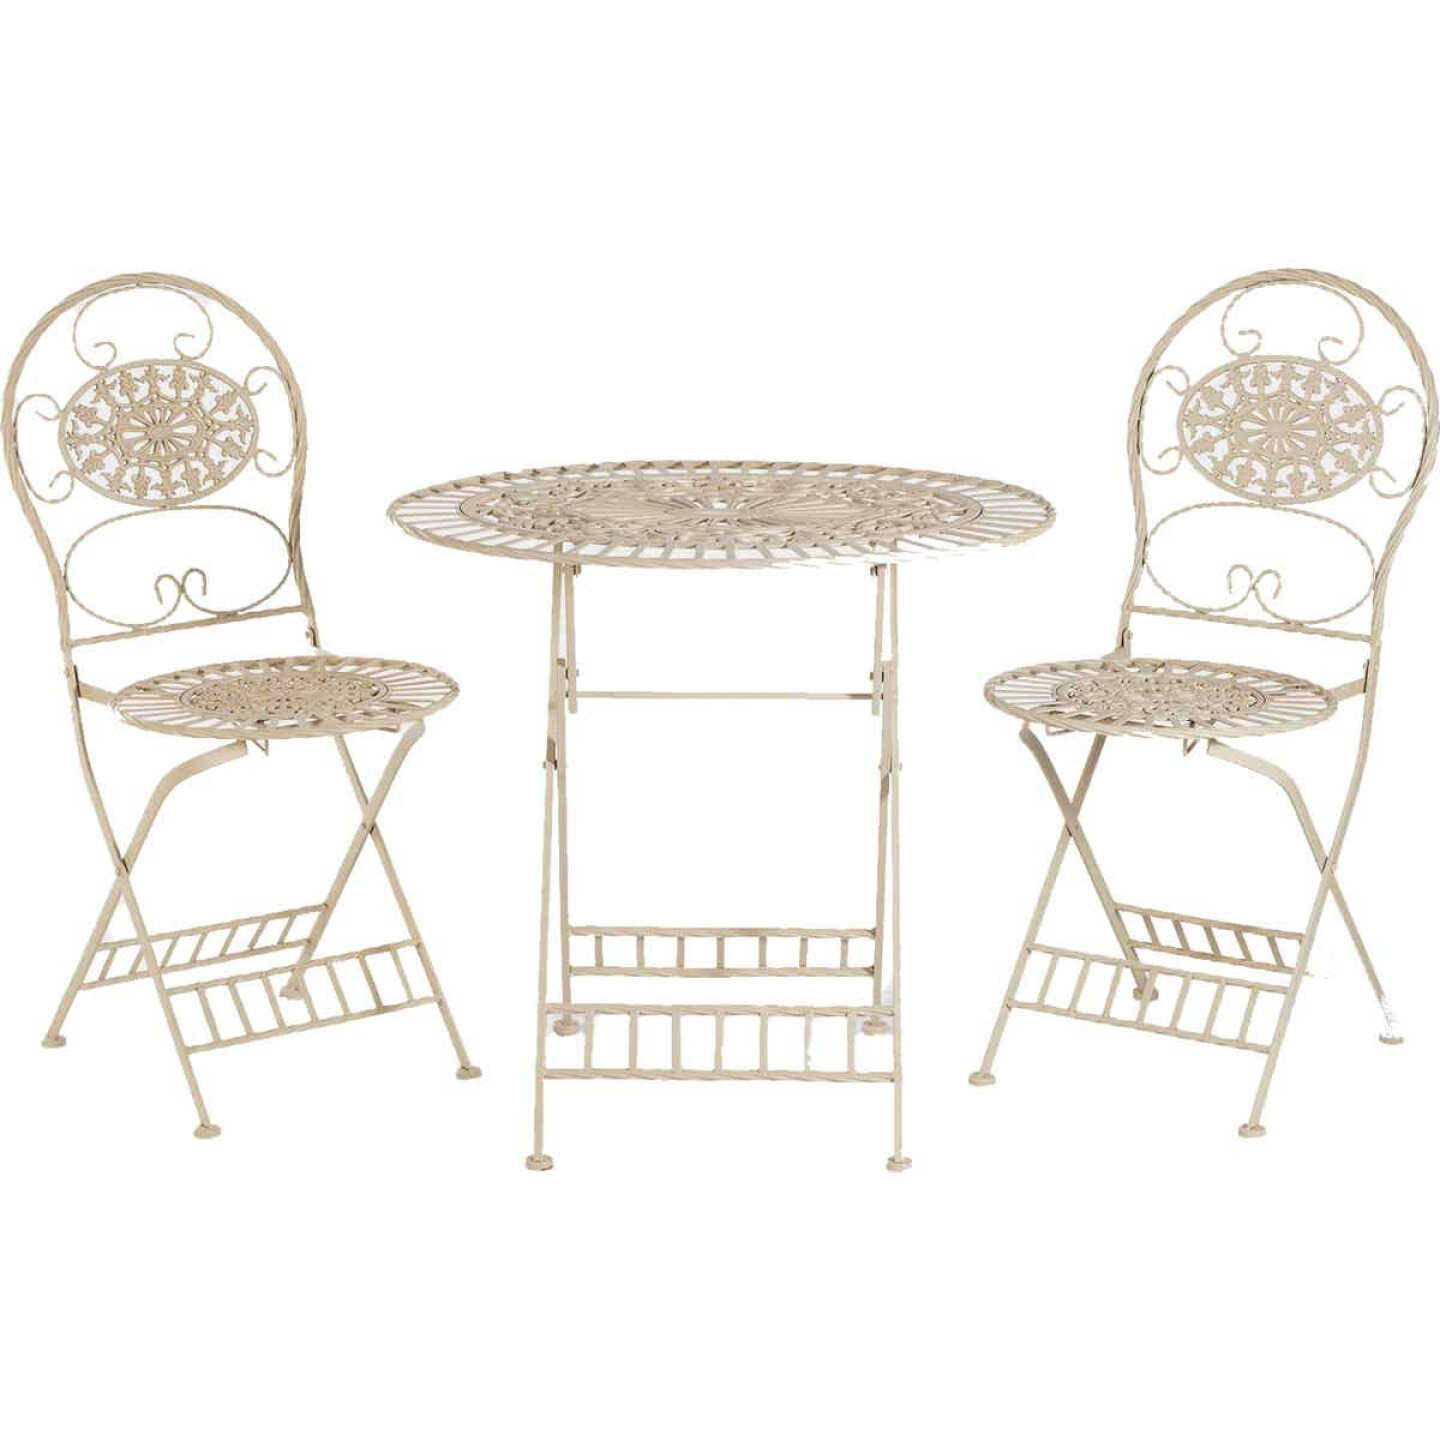 Alpine KIY212A-WT Bistro Table and Chairs Set - White